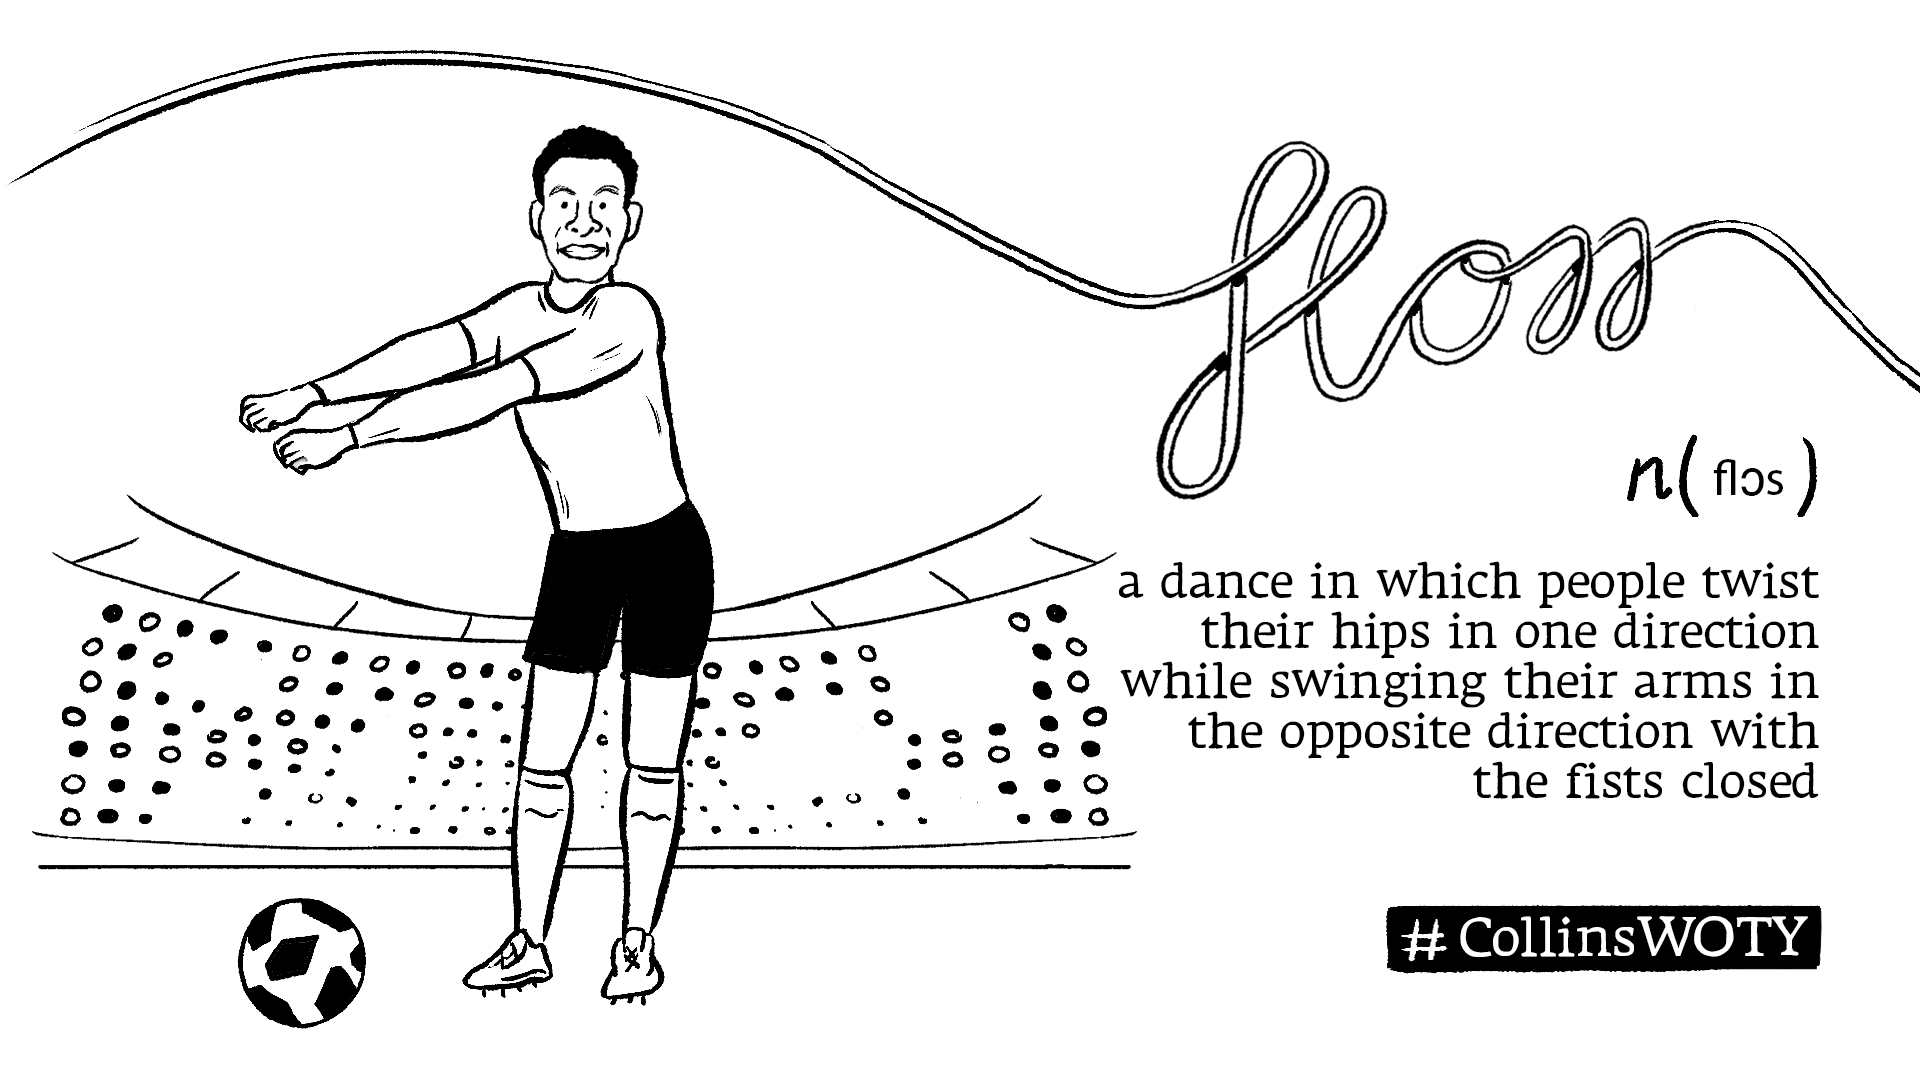 floss: a dance in which people twist their hips in one direction while swinging their arms in the opposite direction with the fists closed